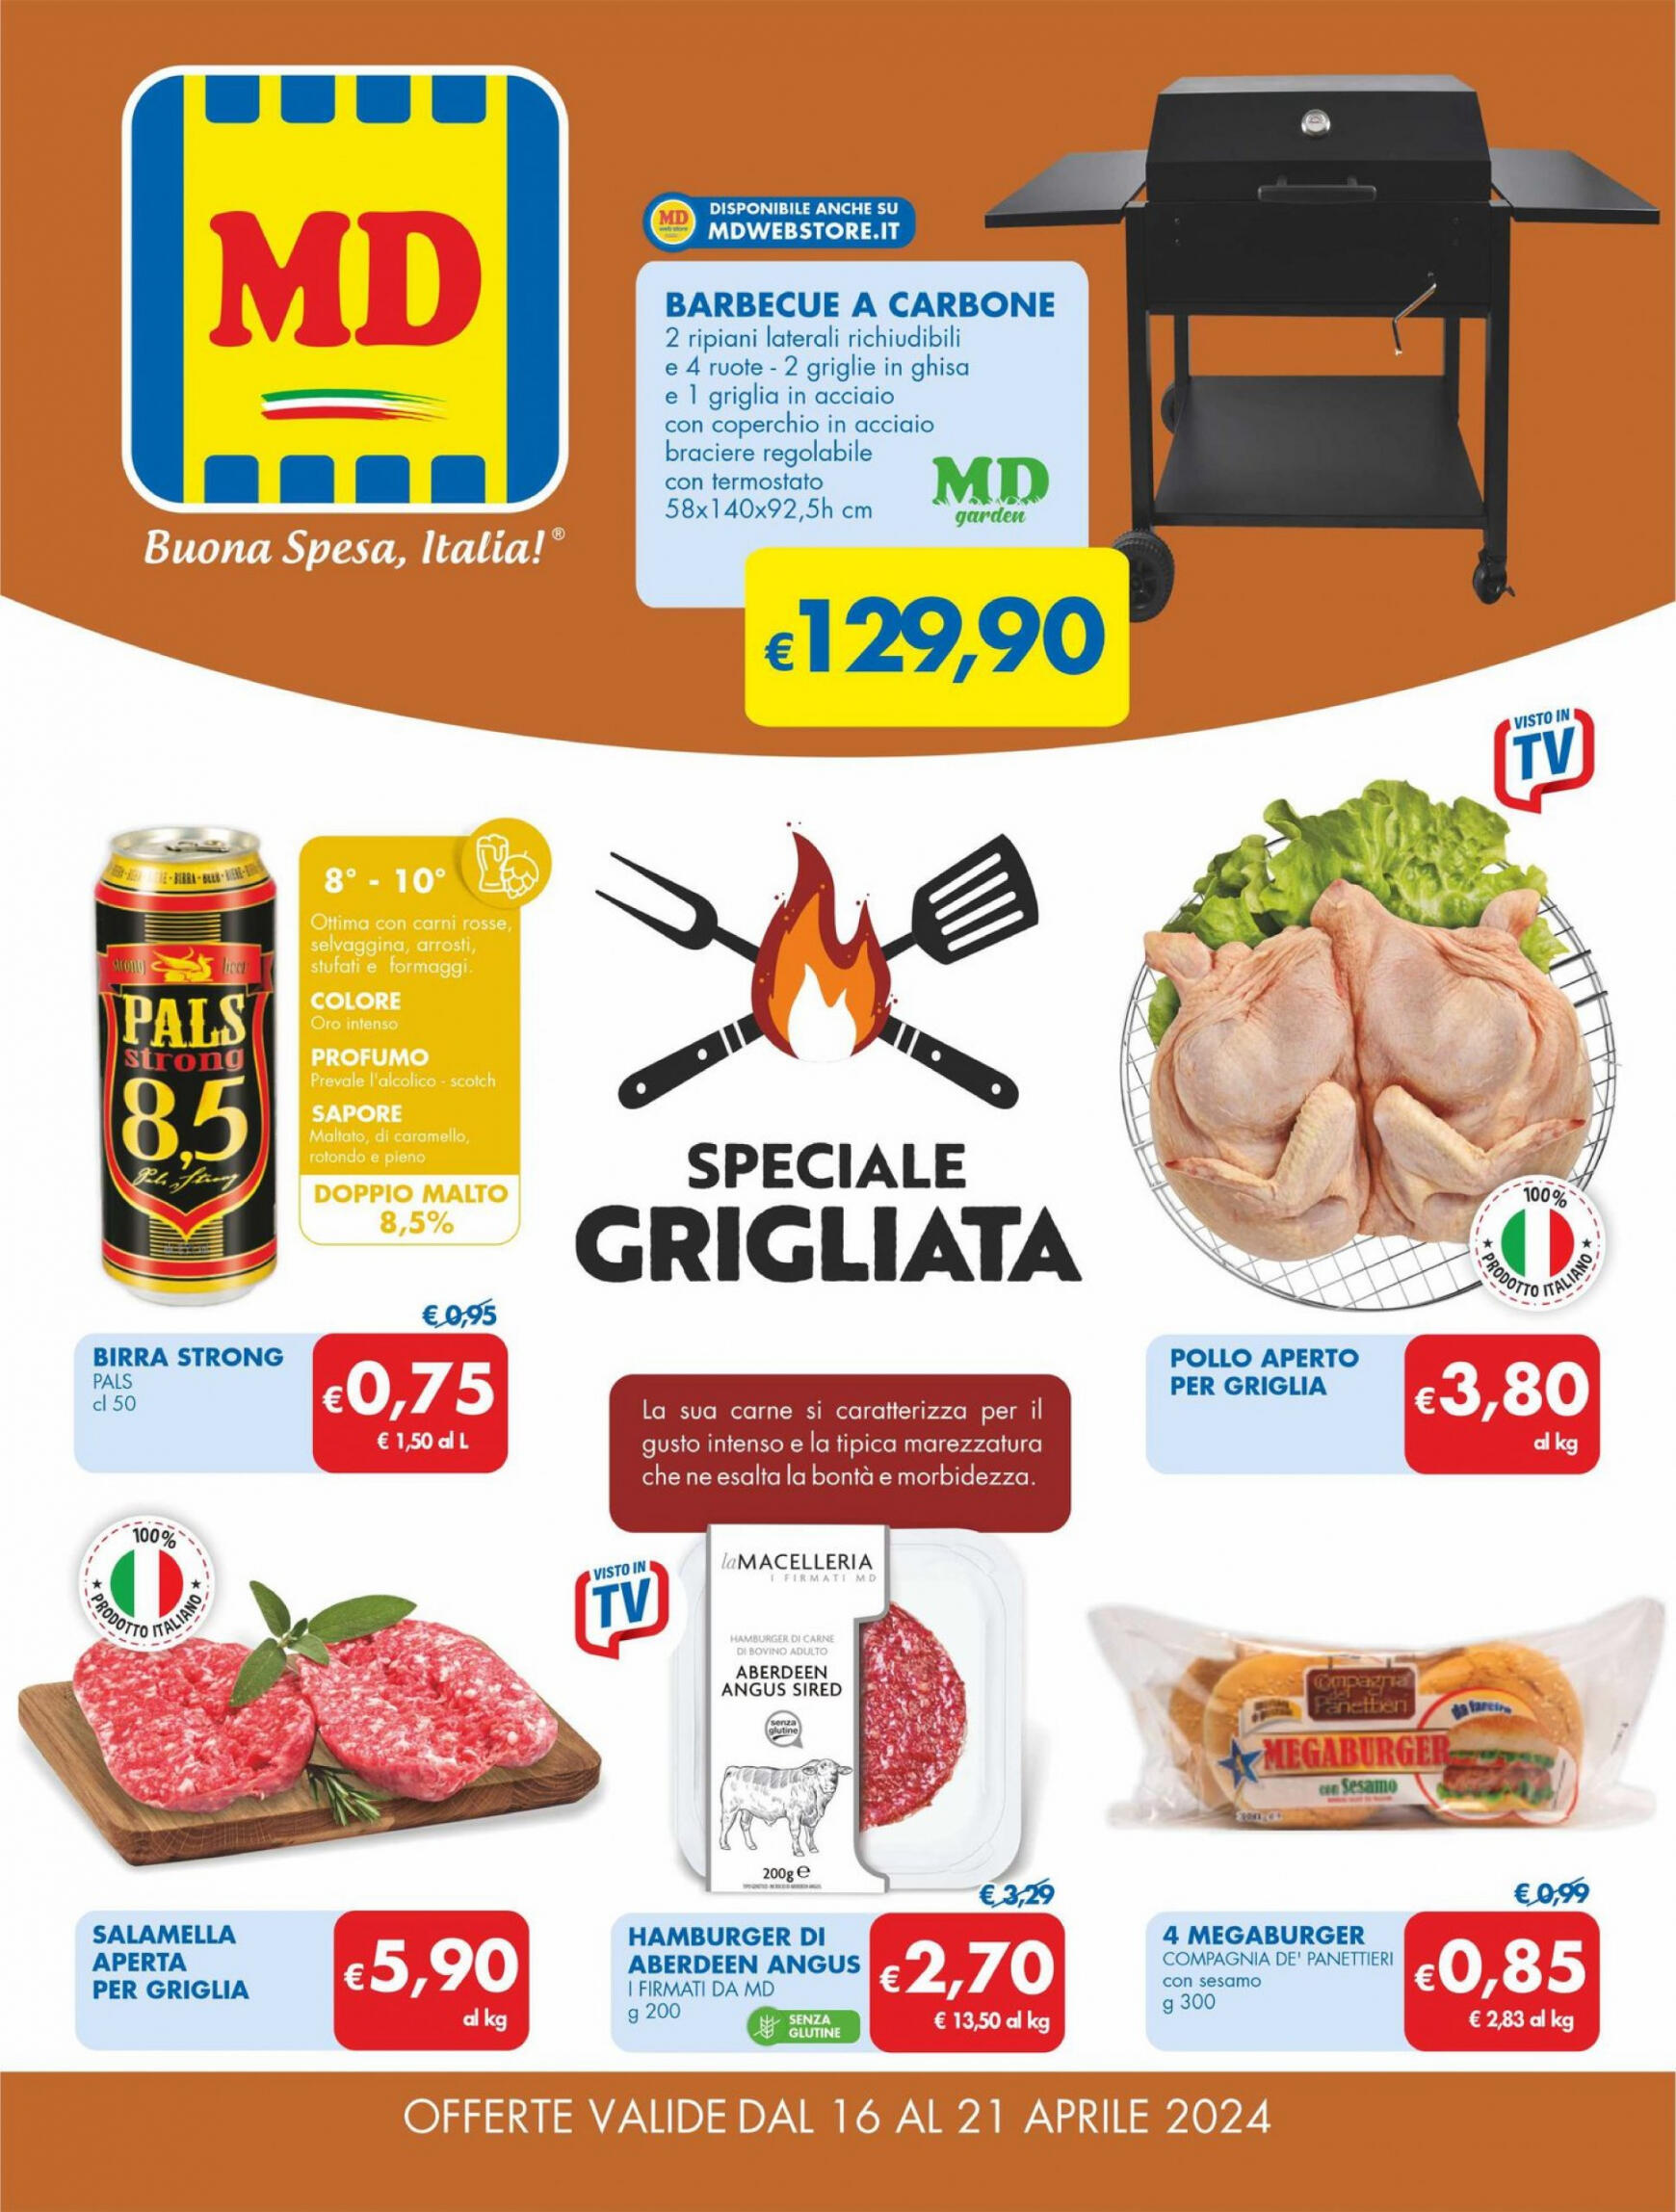 md-discount - Nuovo volantino MD 16.04. - 21.04. - page: 1